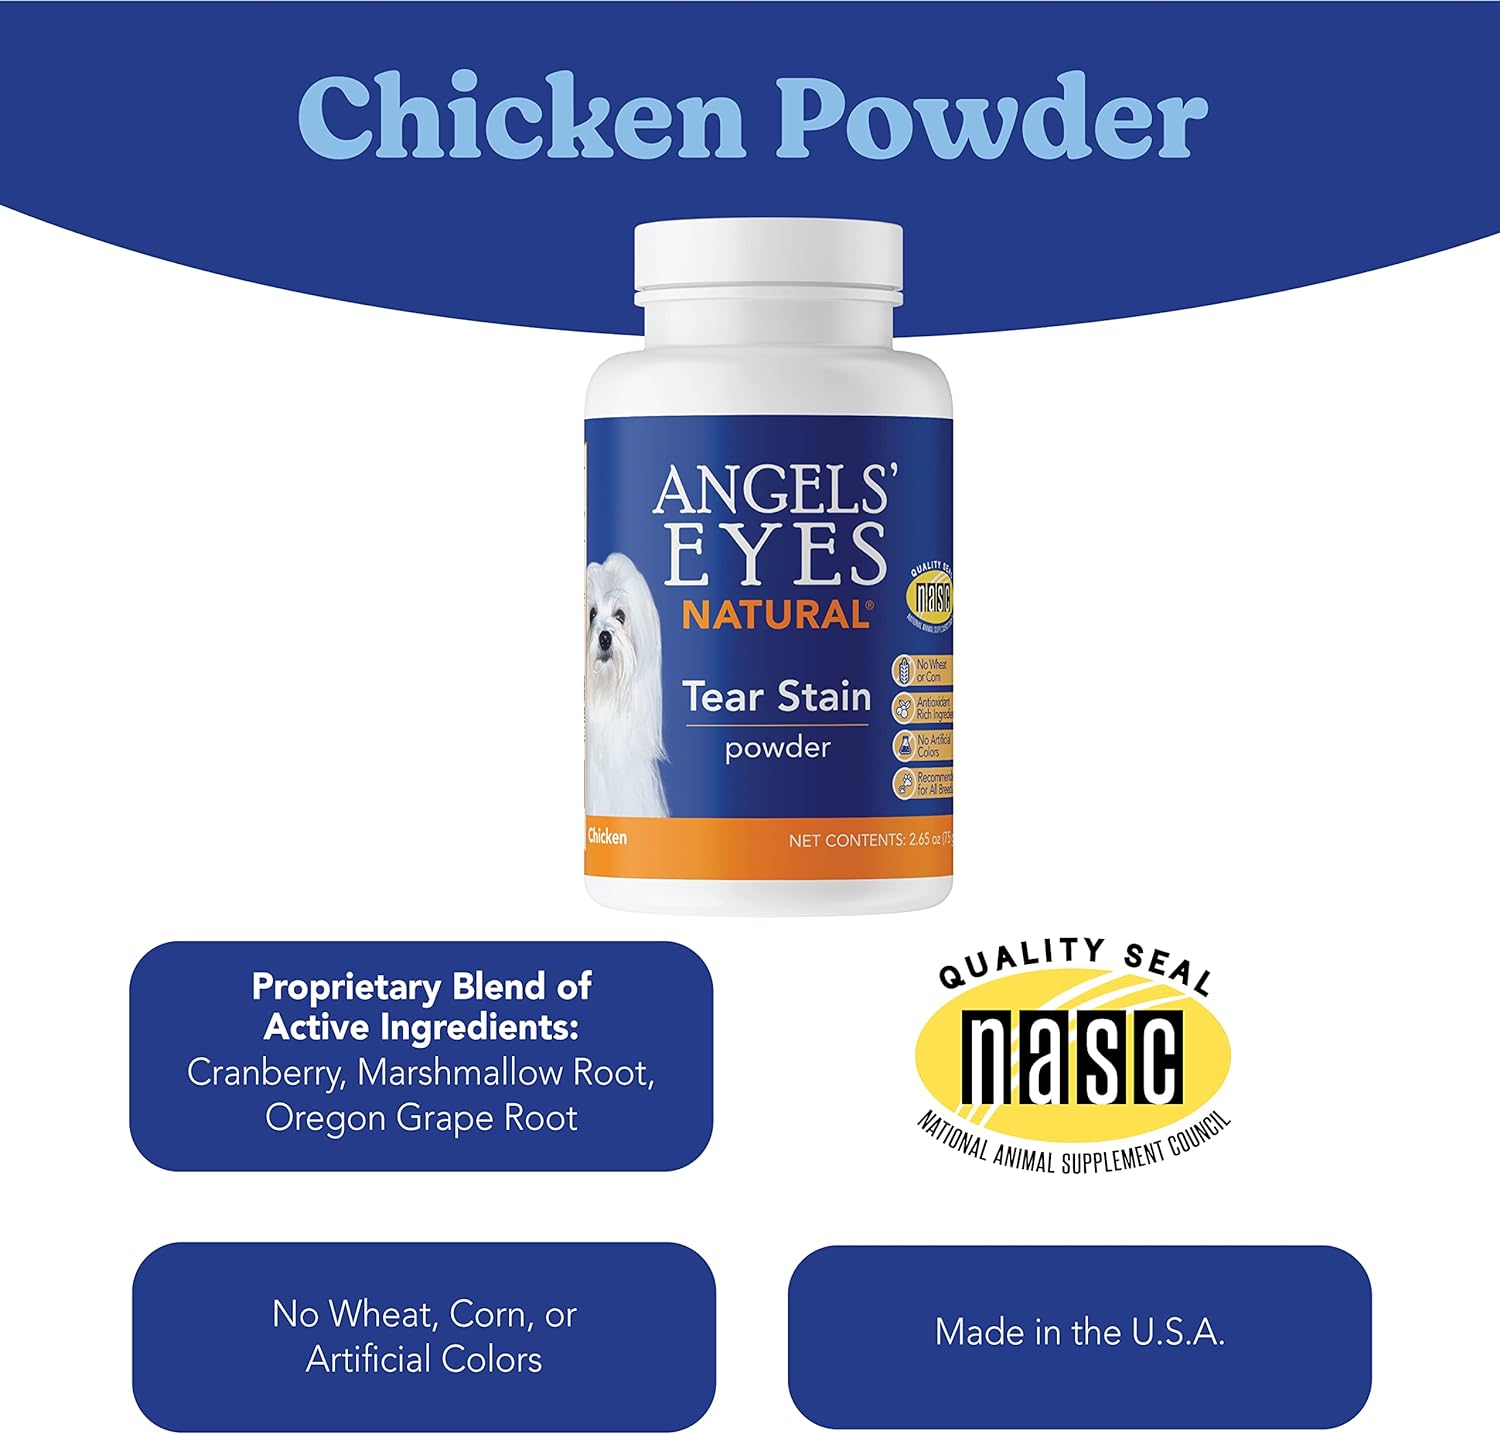 ANGELS' EYES Natural Tear Stain Prevention Chicken Powder for Dogs | All Breeds | No Wheat No Corn | Daily Support for Eye Health | Proprietary Formula |Limited Ingredients | Net Contents 75g : Pet Eye Care Supplies : Pet Supplies